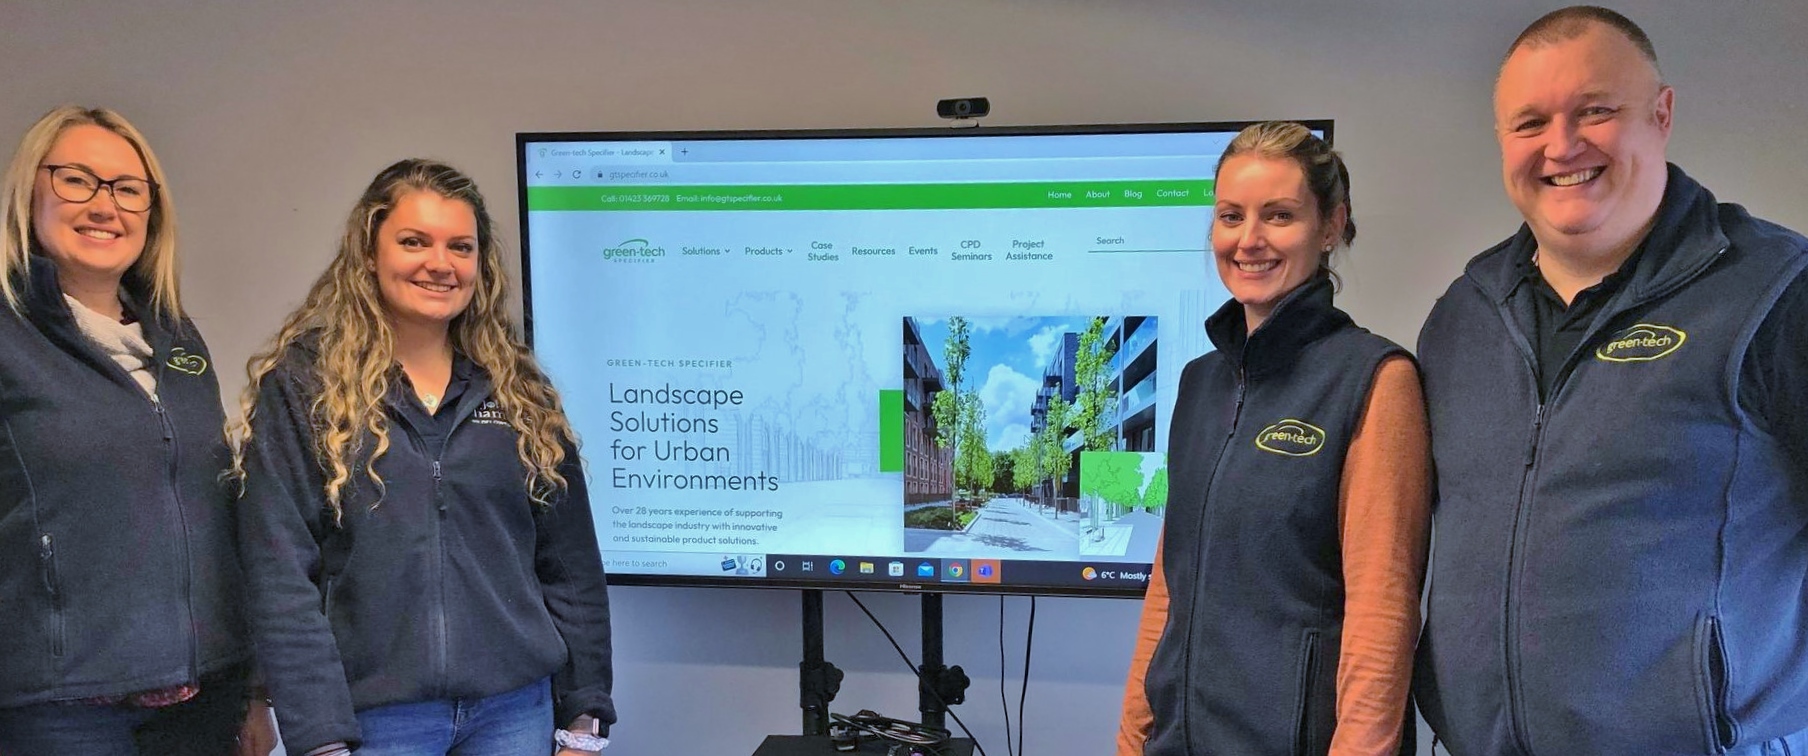 Green-tech Specifier launches new website 